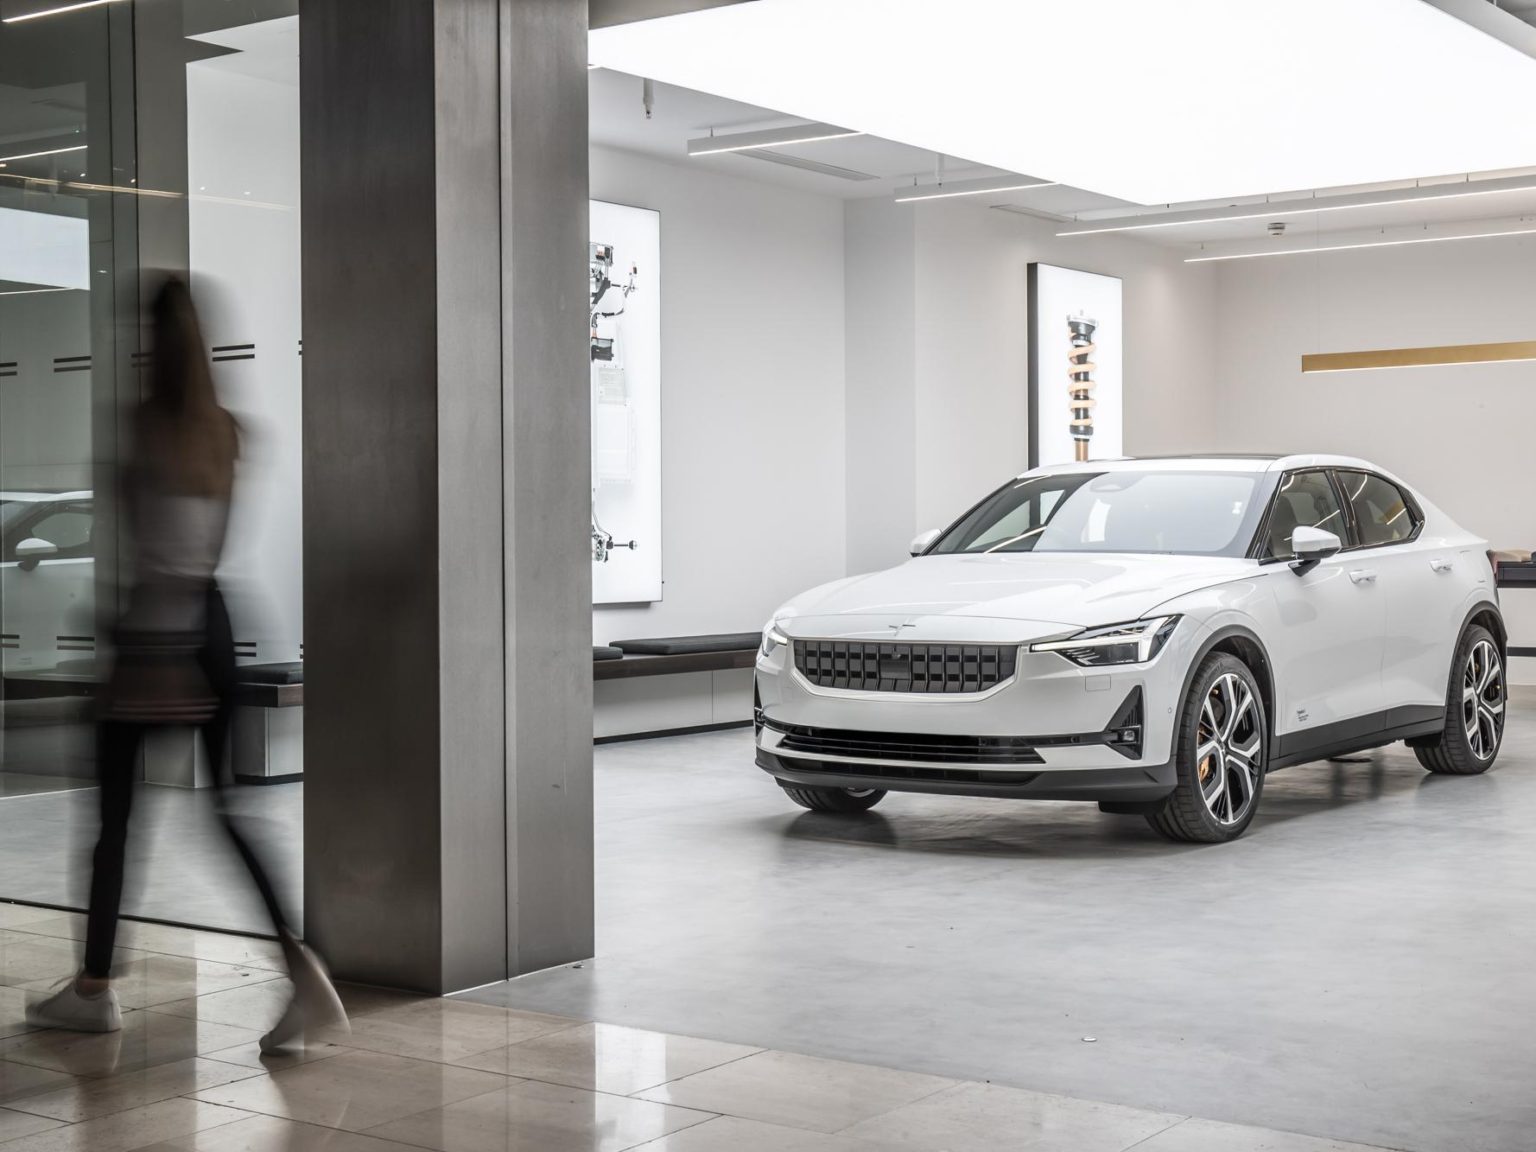 Polestar currently operates four showrooms in the U.S.